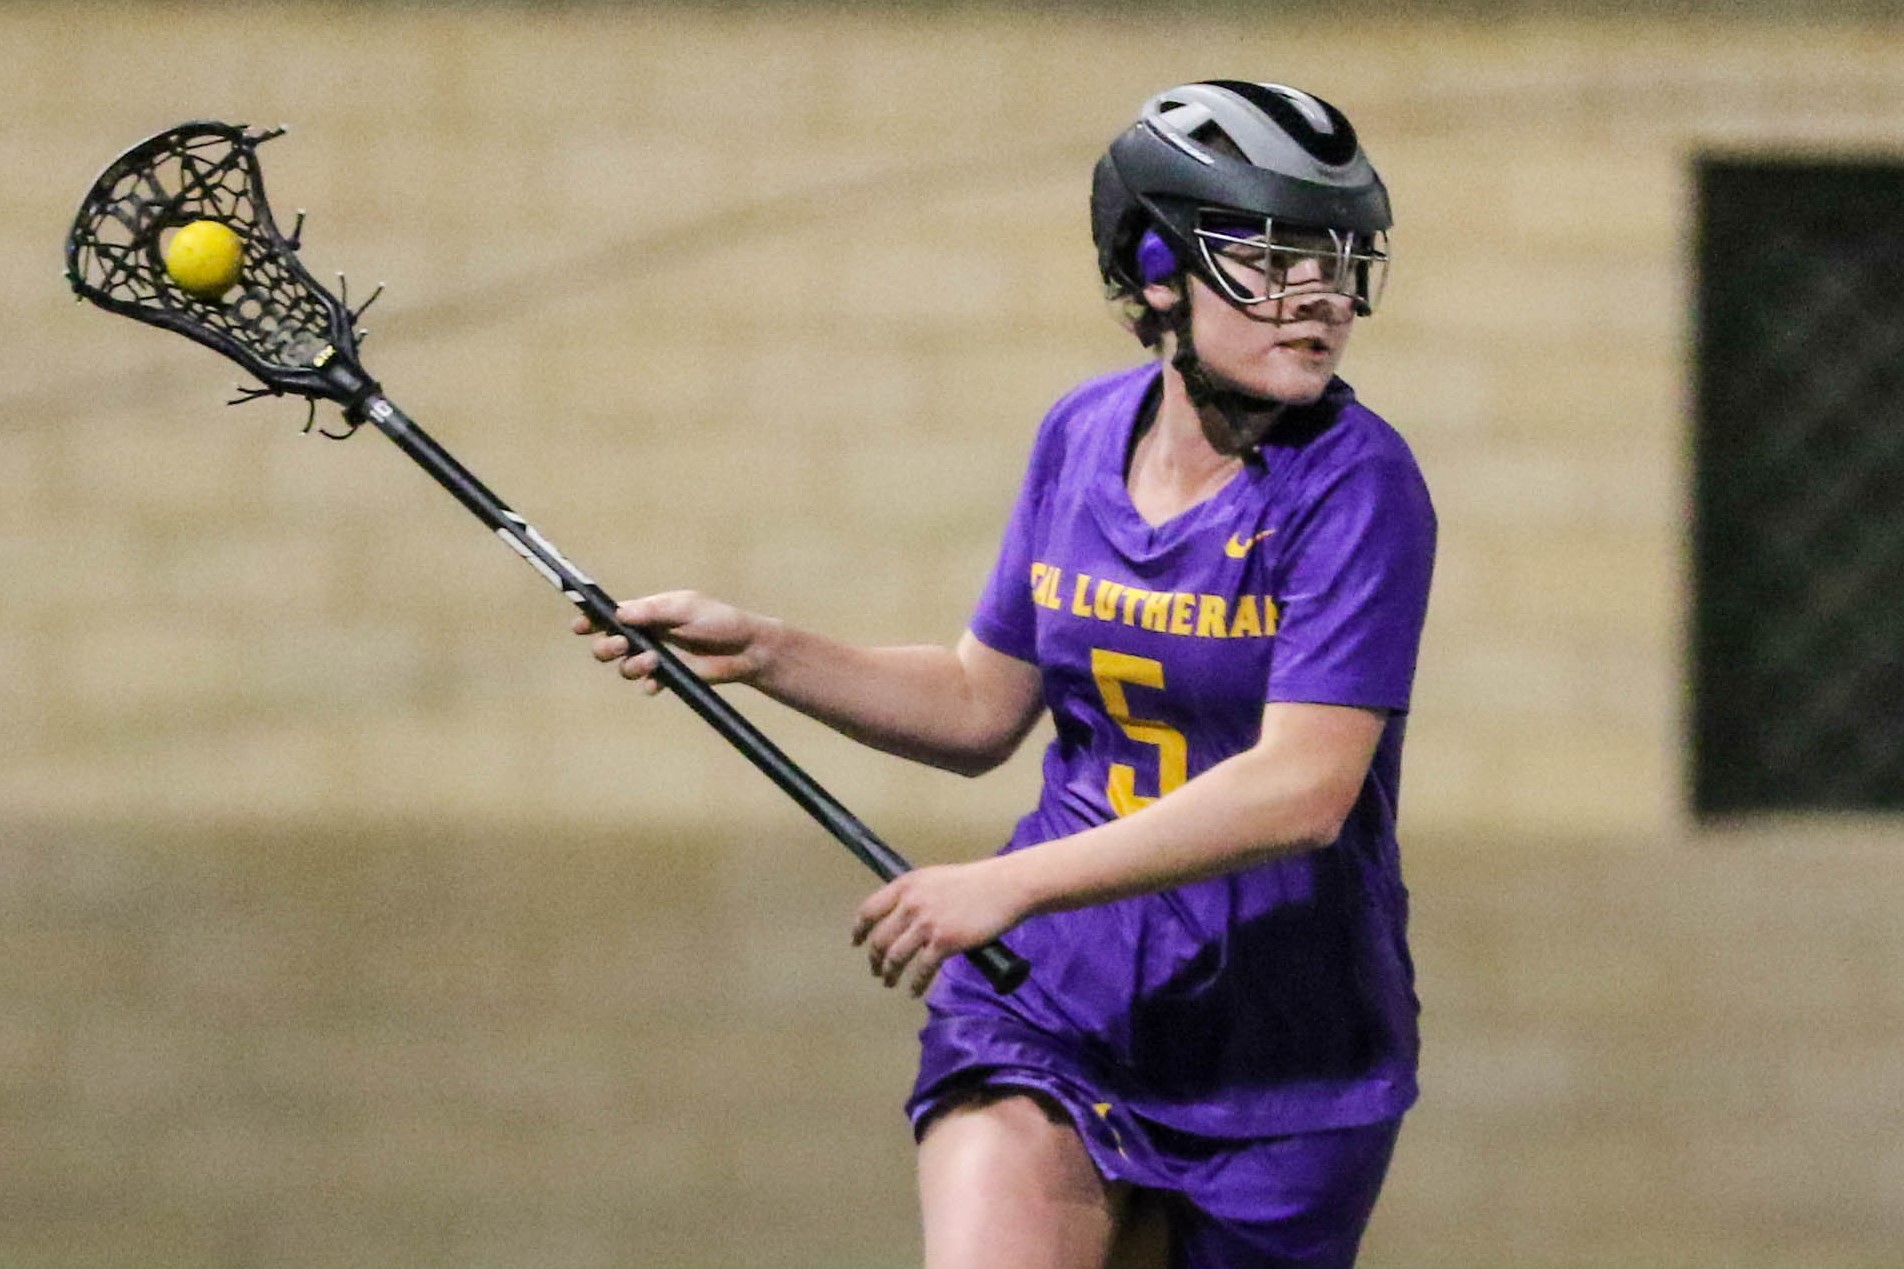 Regals Get More Firsts, Records in Loss to Whittier